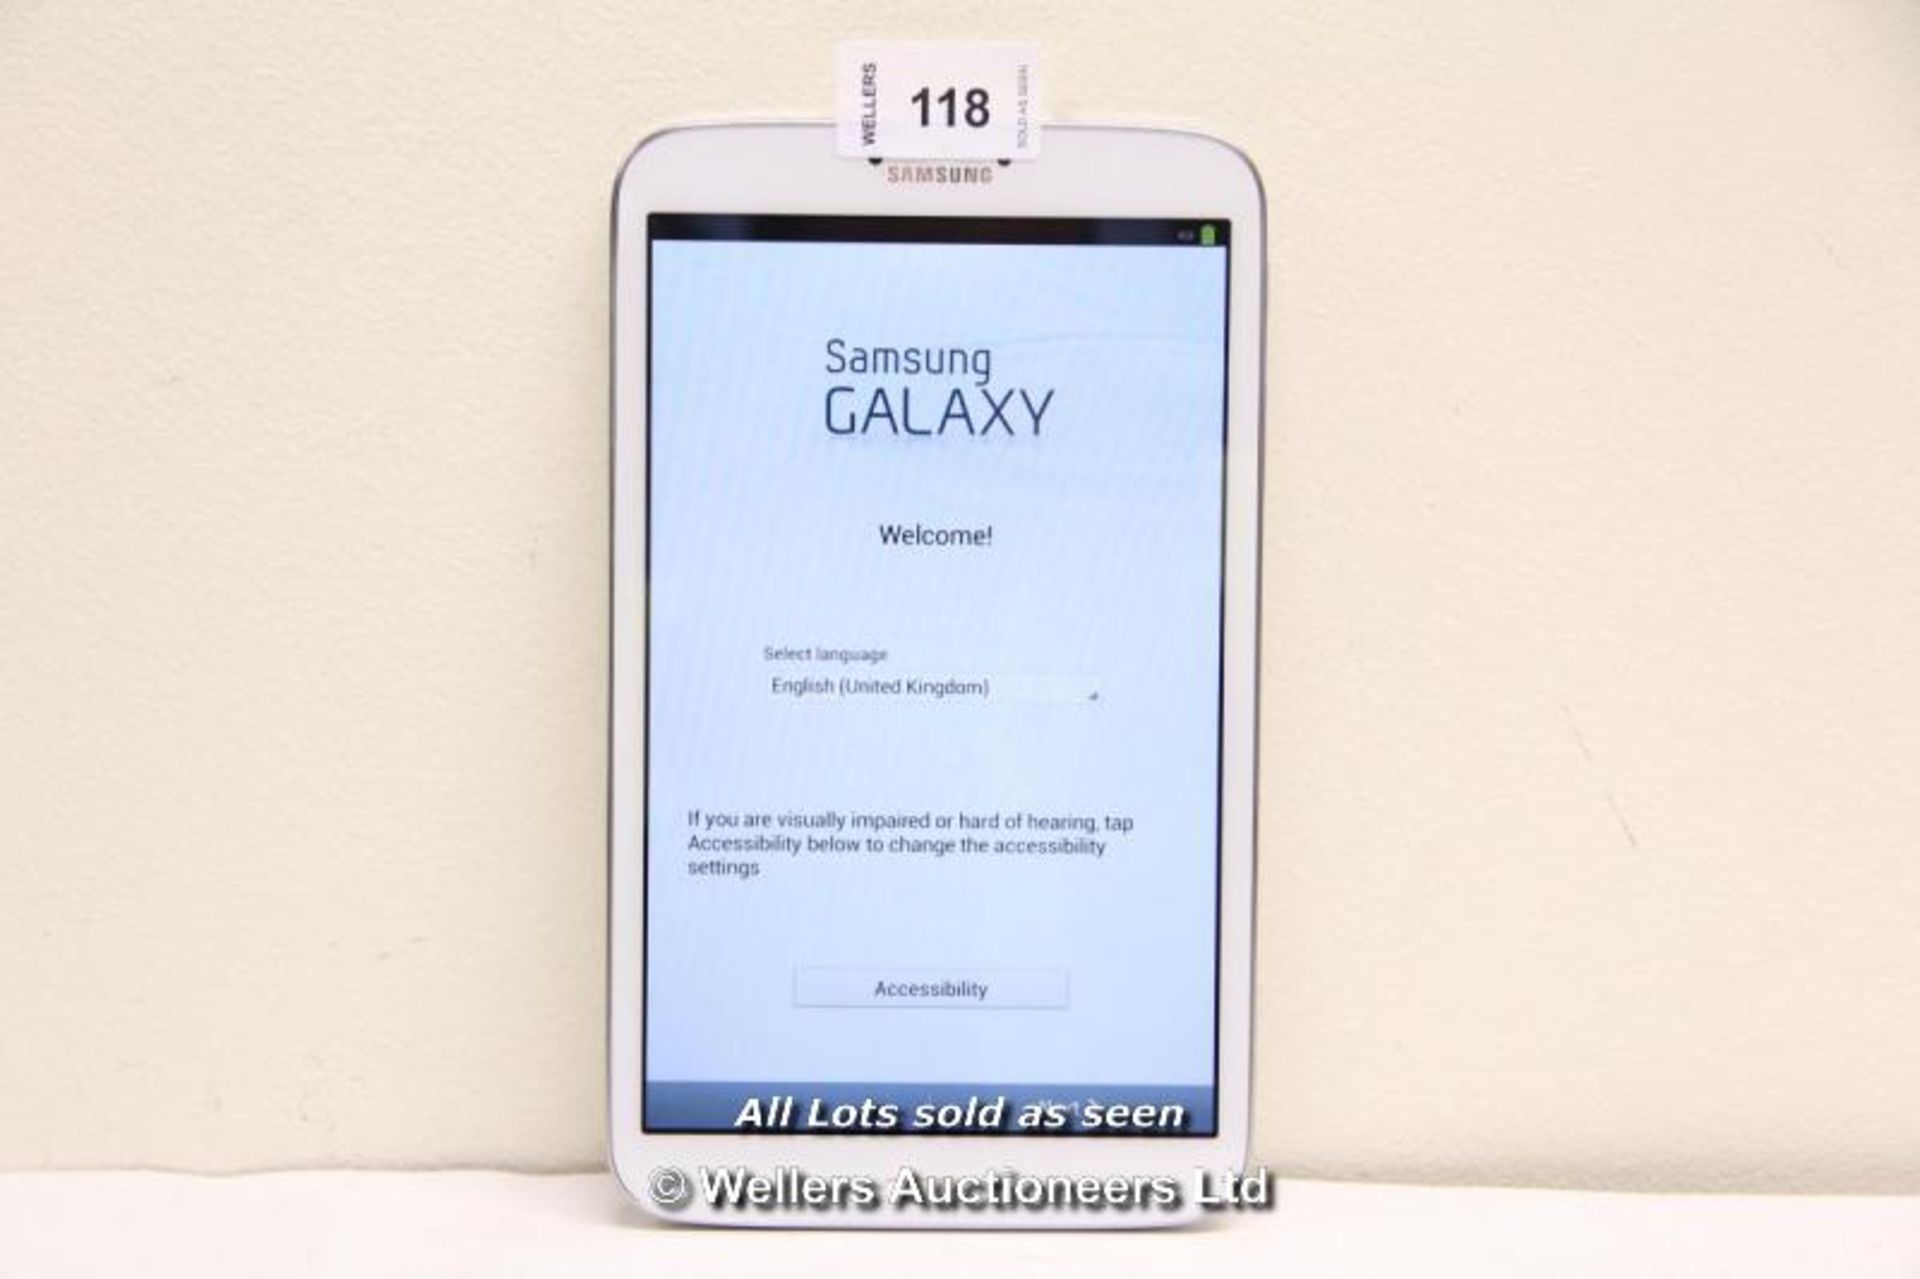 SAMSUNG GALAXY TAB 3 SM-T310 16GB WI-FI  8" - WHITE (36064360) / INCLUDING CHARGER AND USB CABLE /